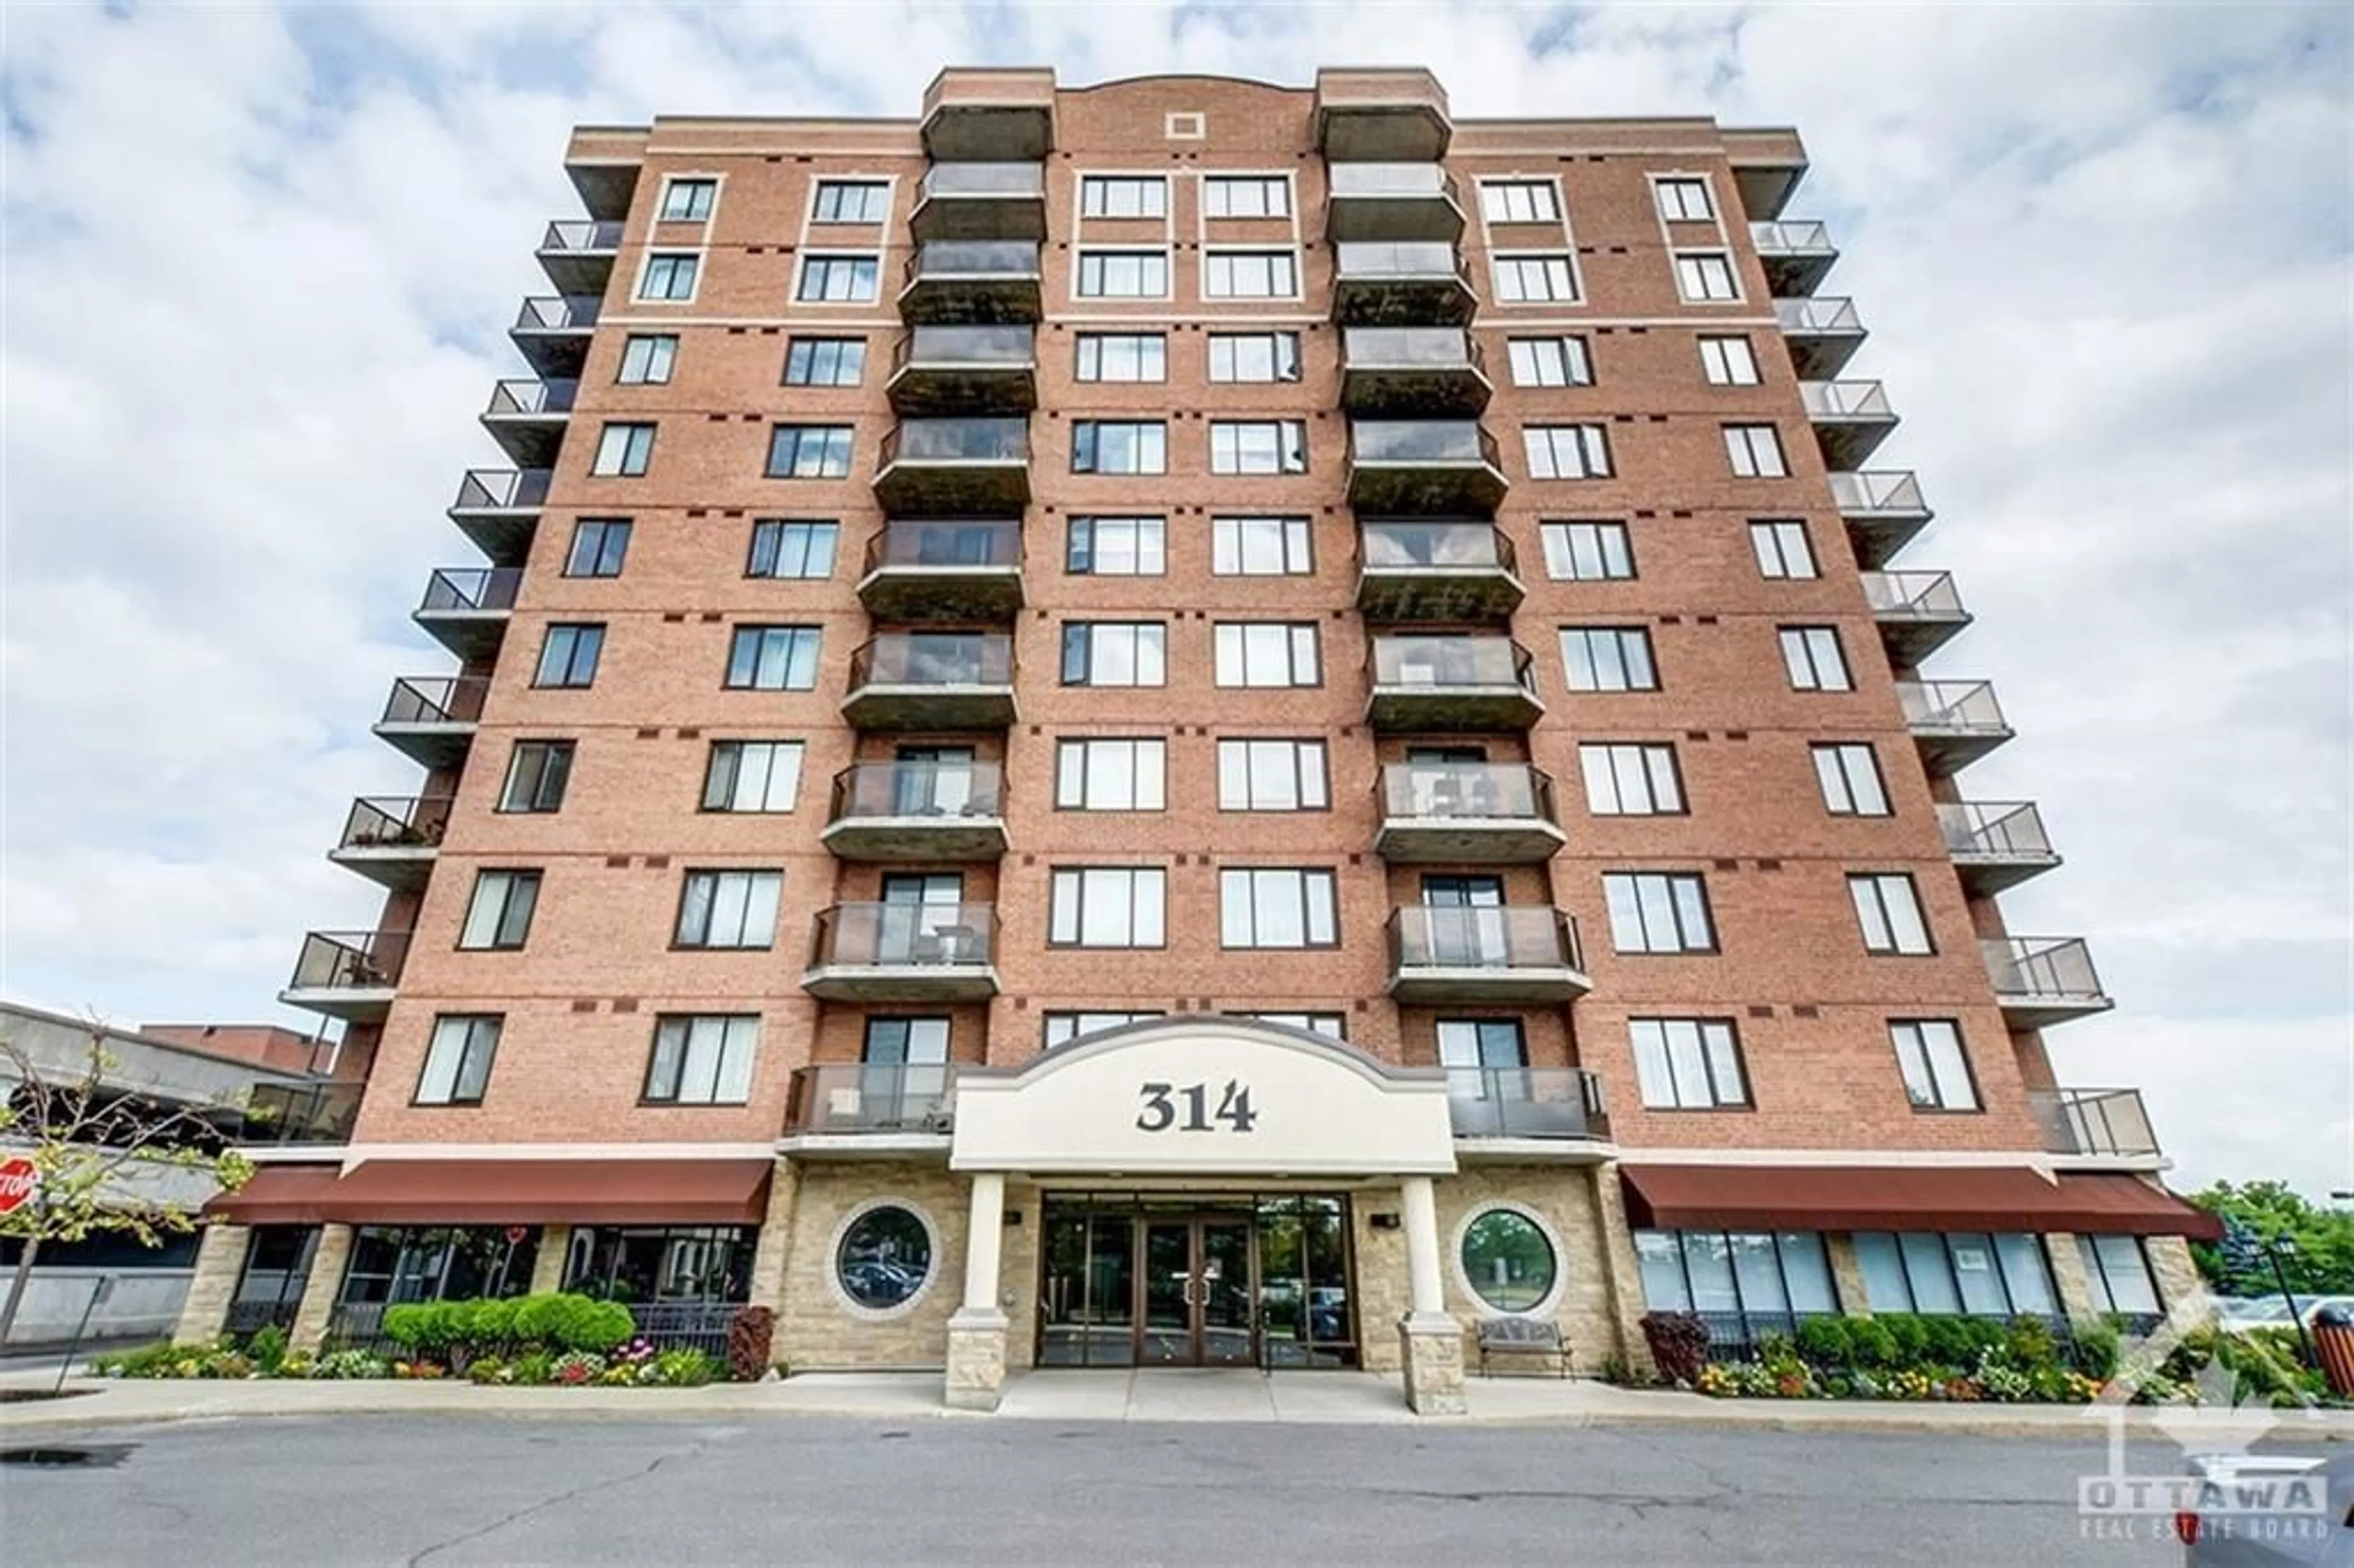 A pic from exterior of the house or condo for 314 CENTRAL PARK Dr #702, Ottawa Ontario K2C 4G4